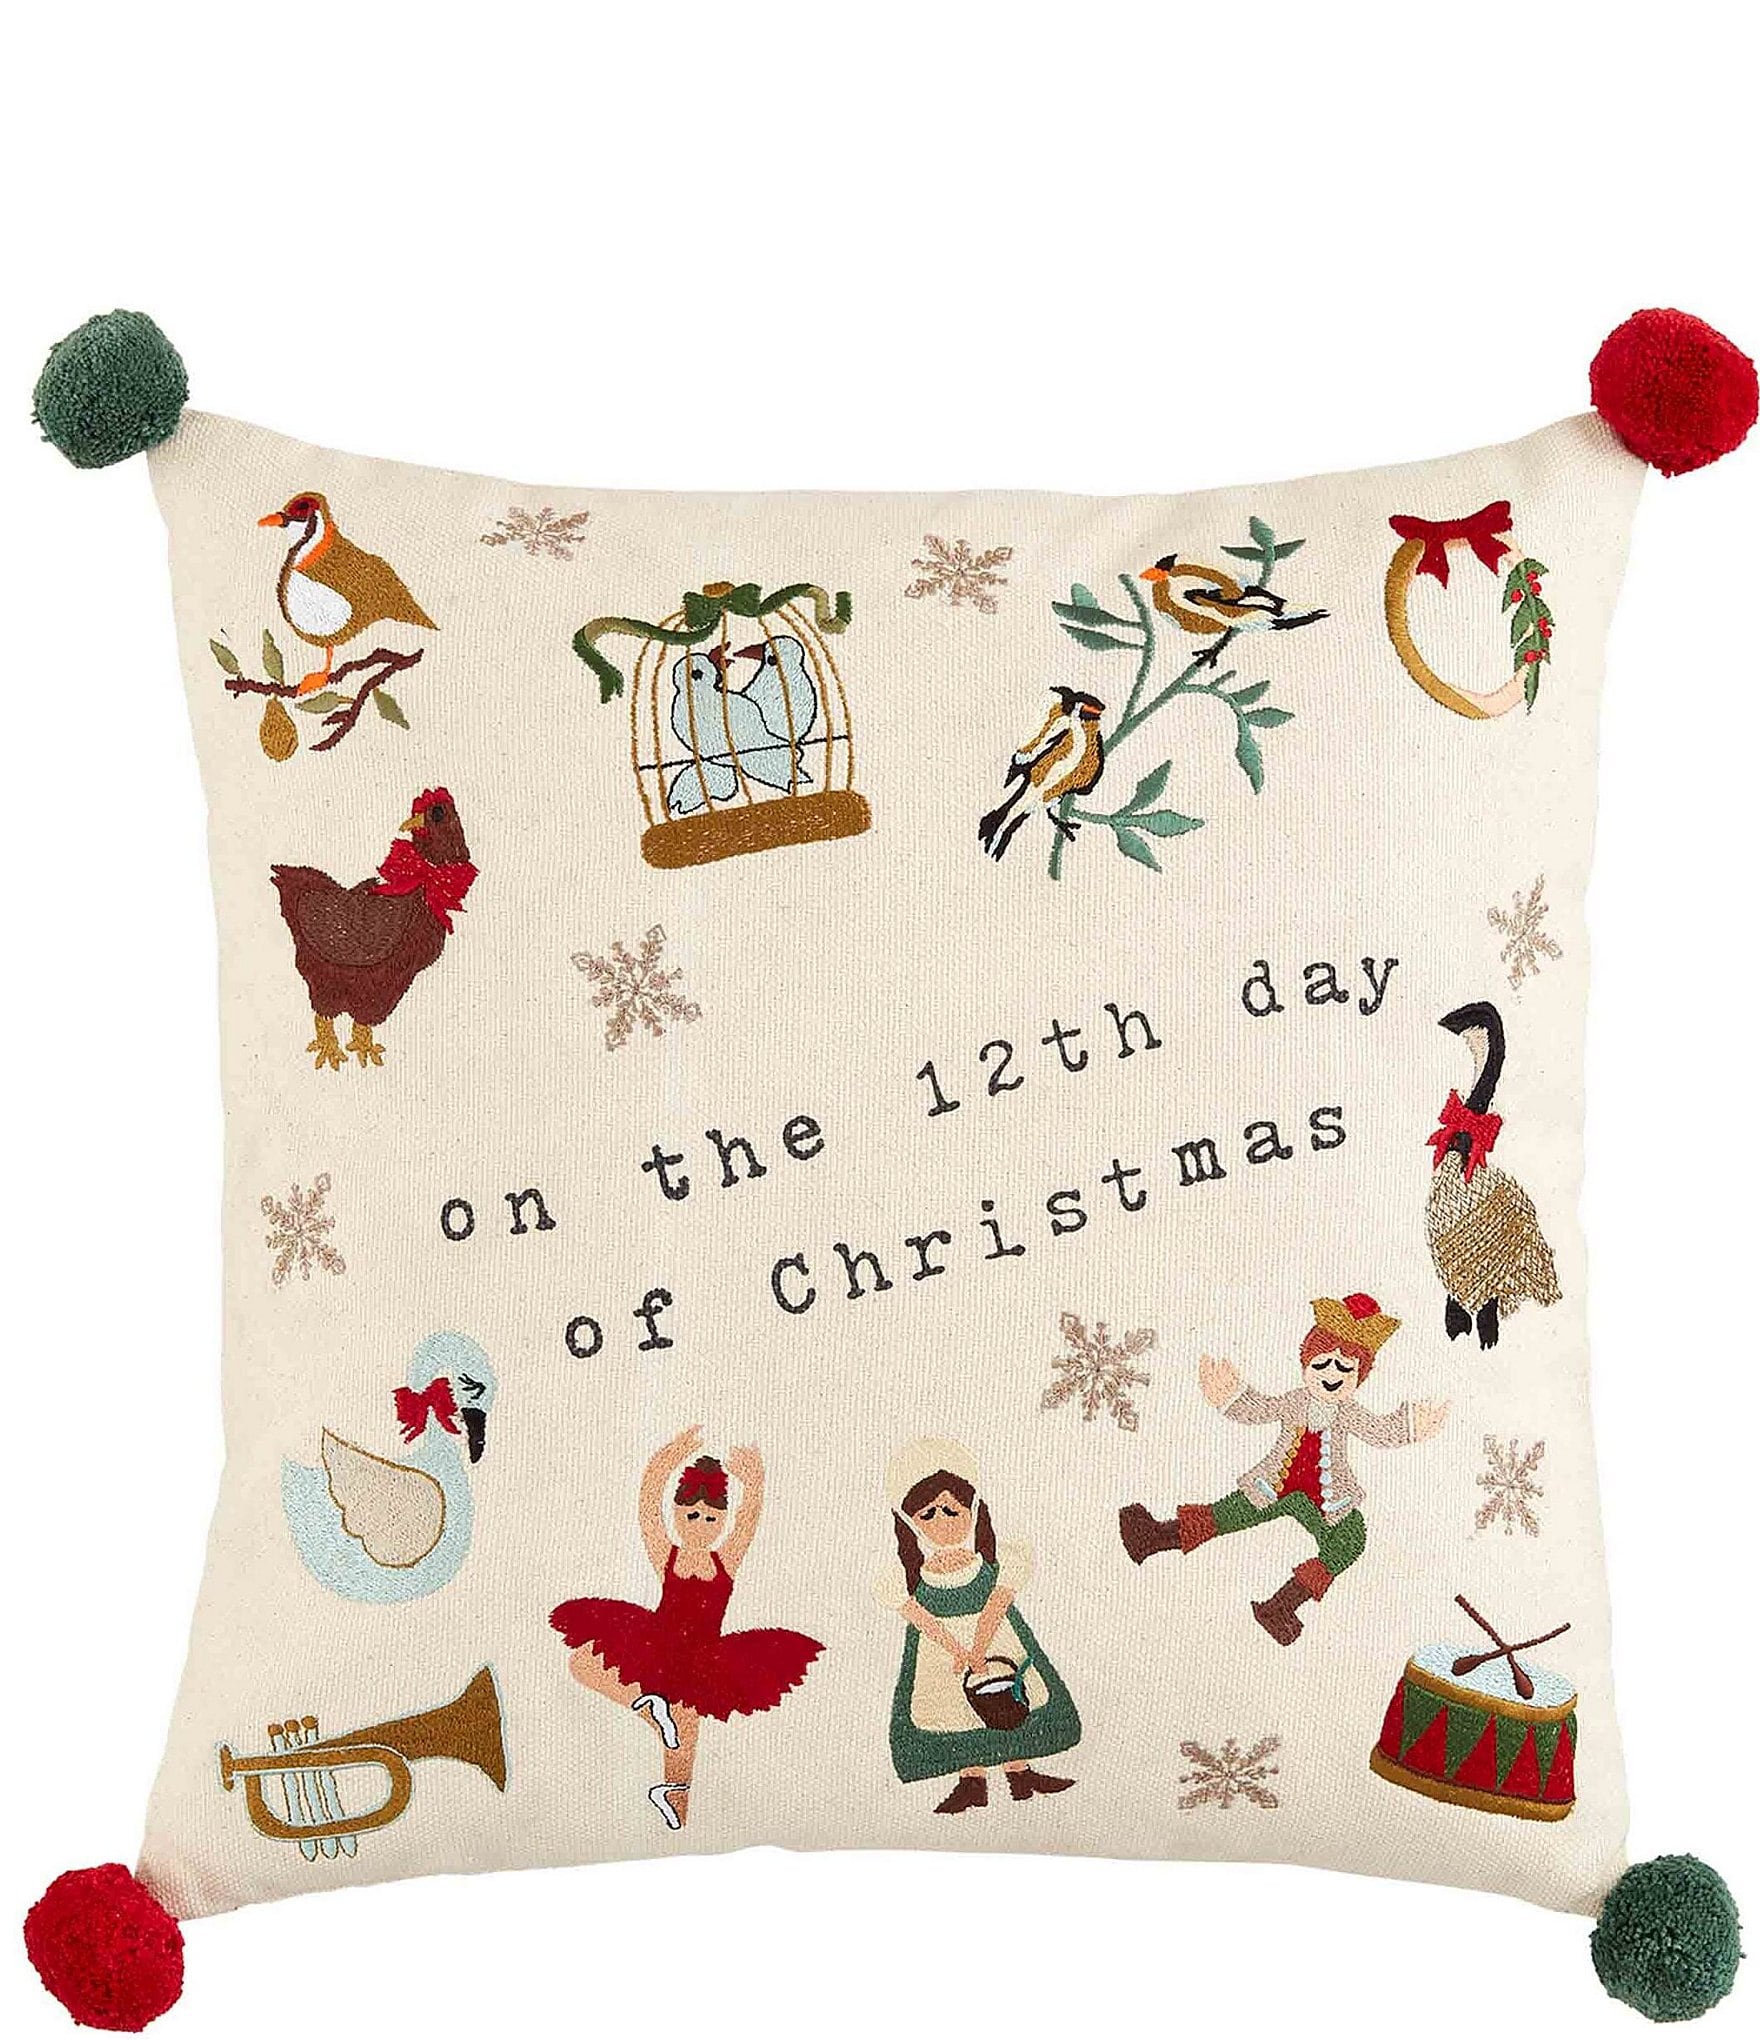 https://dimg.dillards.com/is/image/DillardsZoom/zoom/mud-pie-holiday-collection-12-days-of-christmas-embroidered-square-pillow/00000000_zi_06cc04c1-06ce-4347-ae3a-1ff0243ba84b.jpg